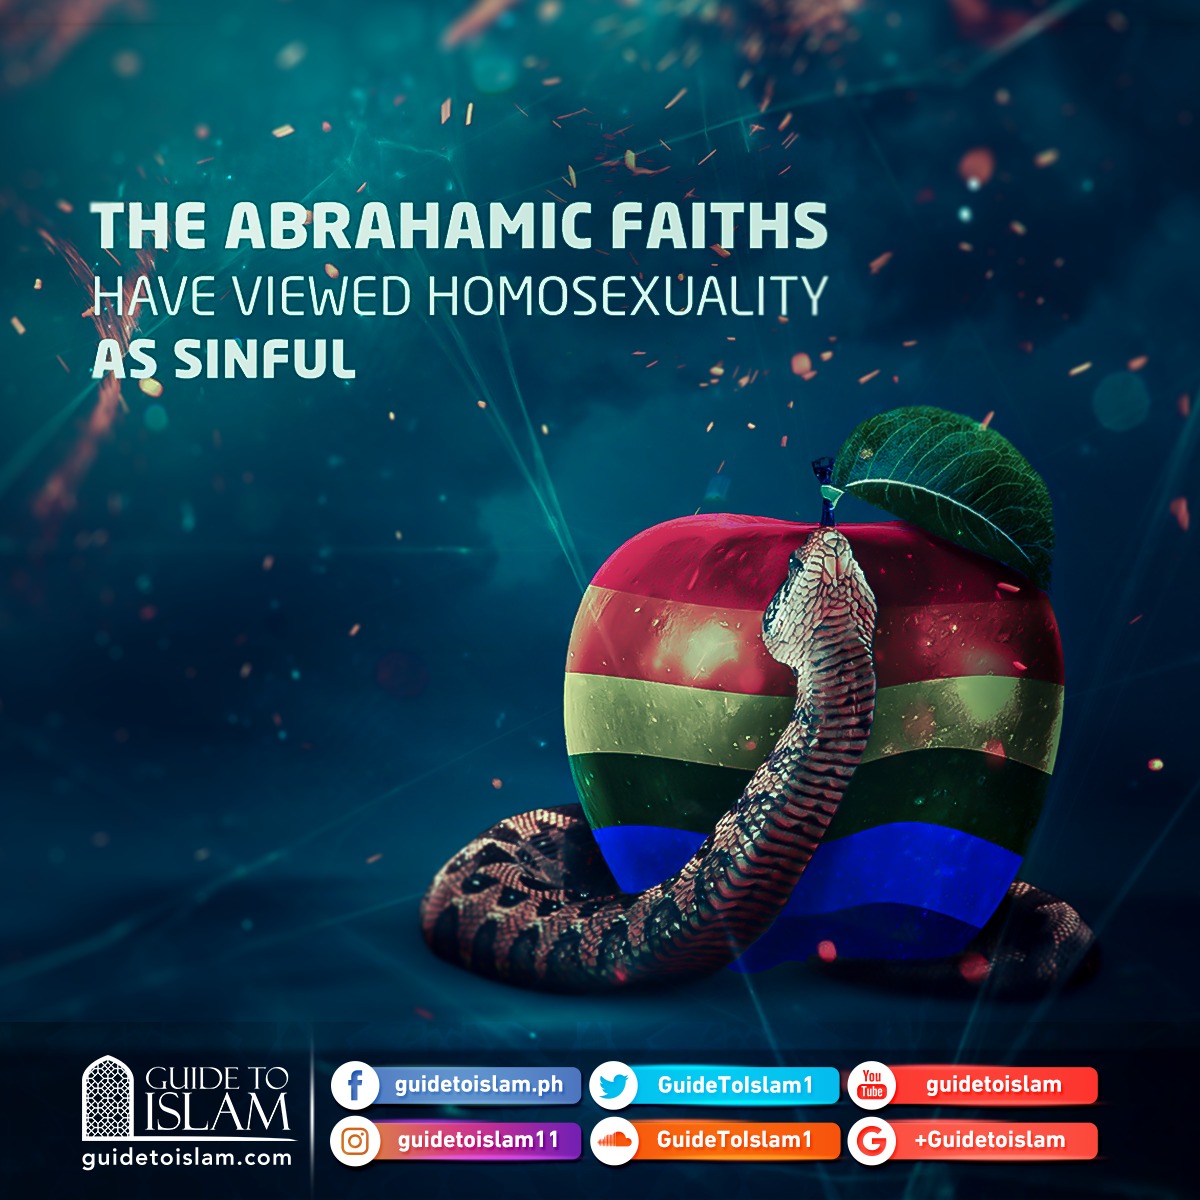 The Abrahamic faiths have viewed homosexuality as sinful